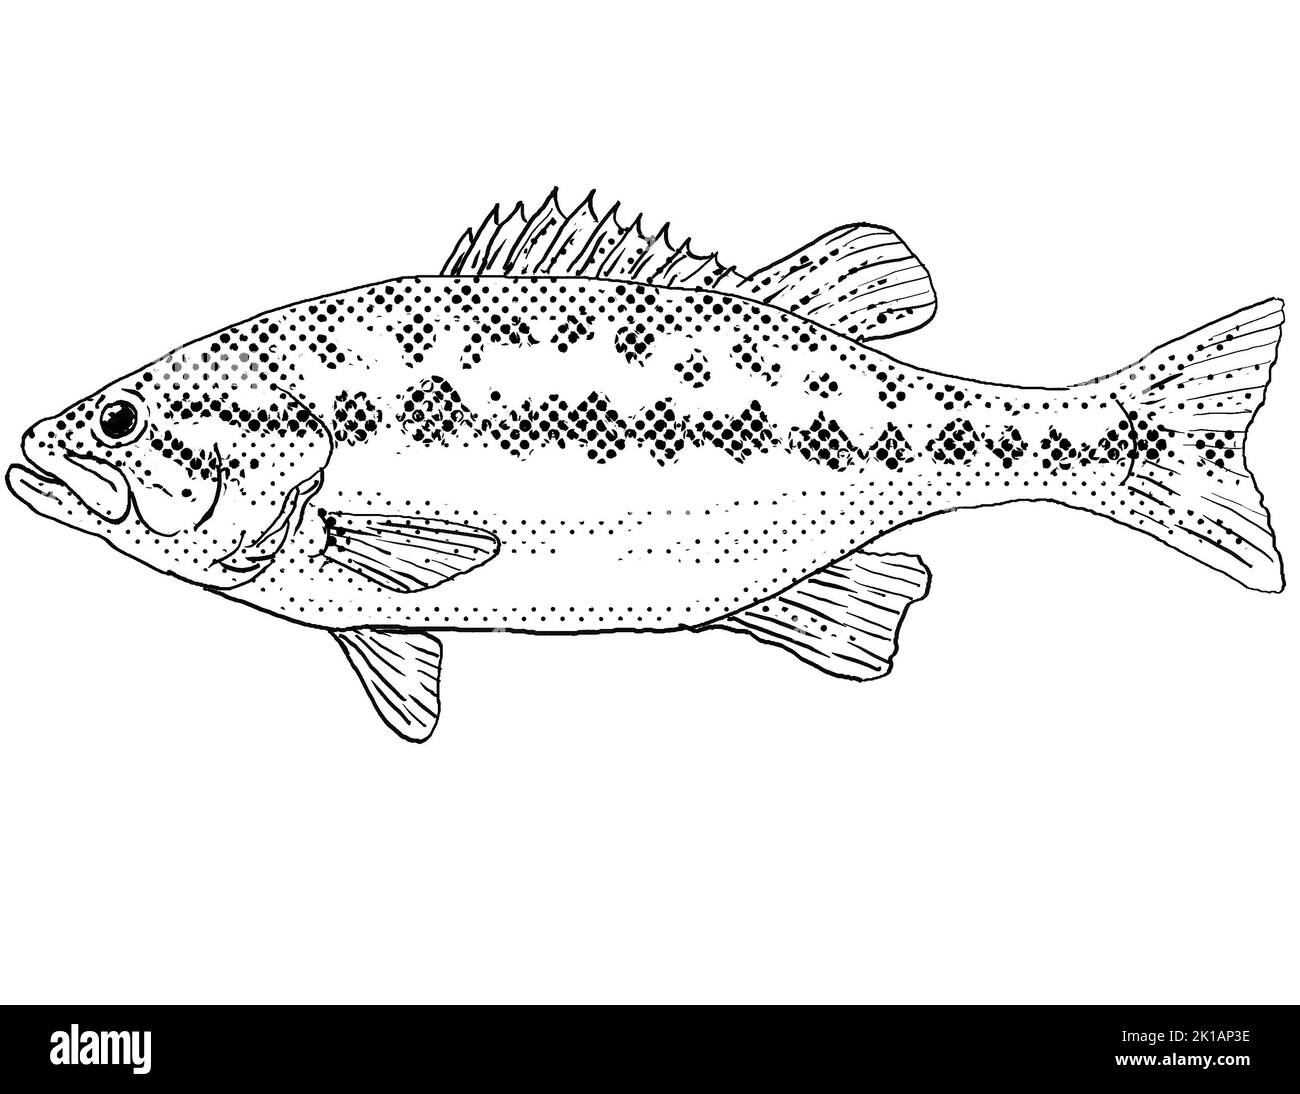 Cartoon style line drawing of a Micropterus henshalli or Alabama bass  a freshwater fish endemic to North America with halftone dots shading on isolat Stock Photo